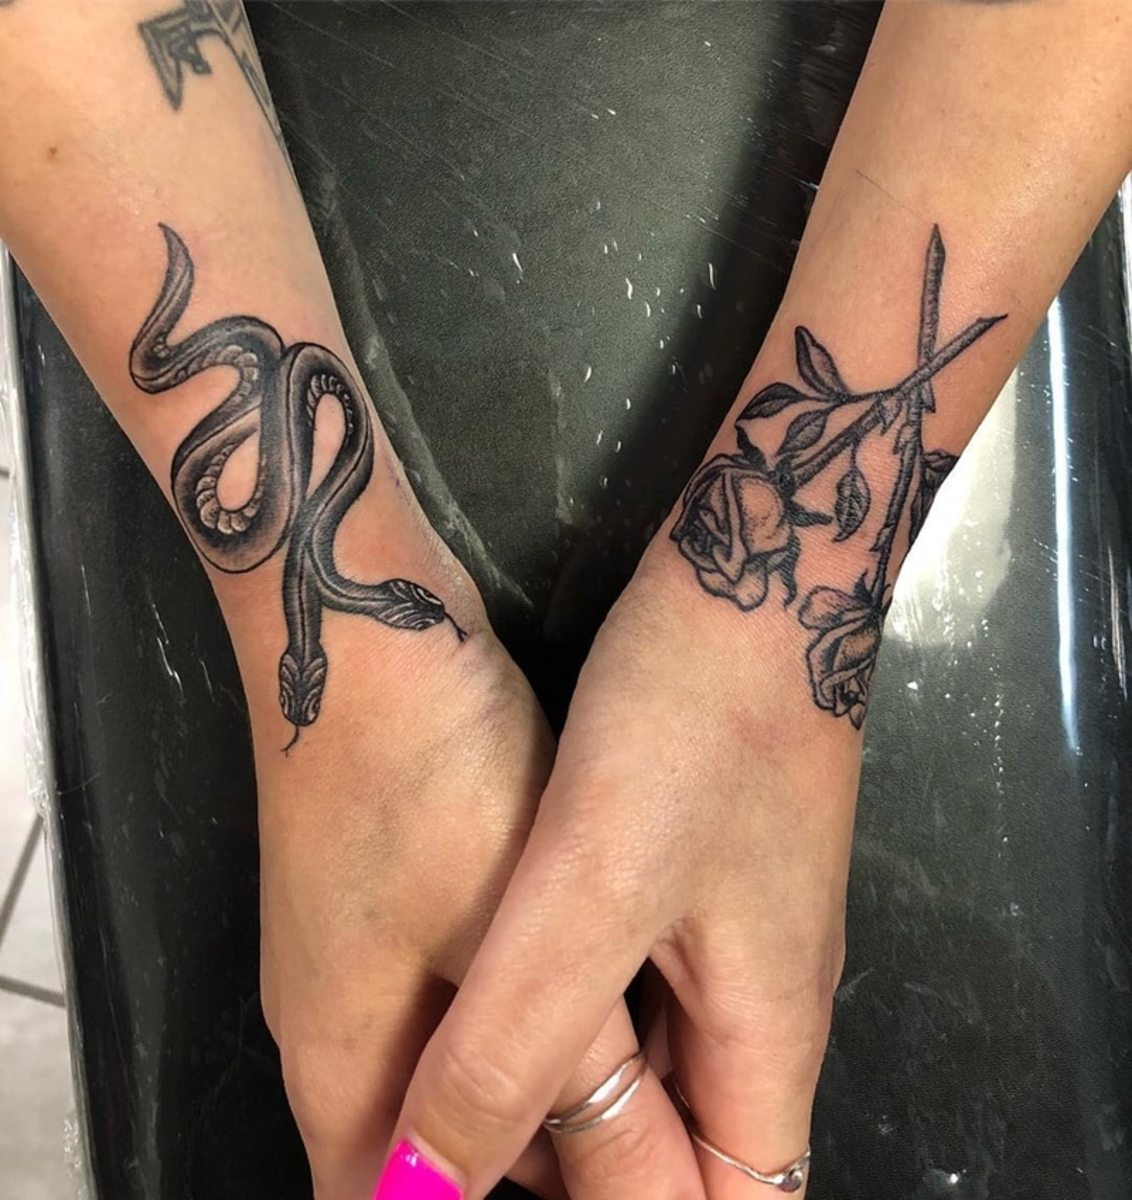 These two wrist tattoos "speak" to one another. 